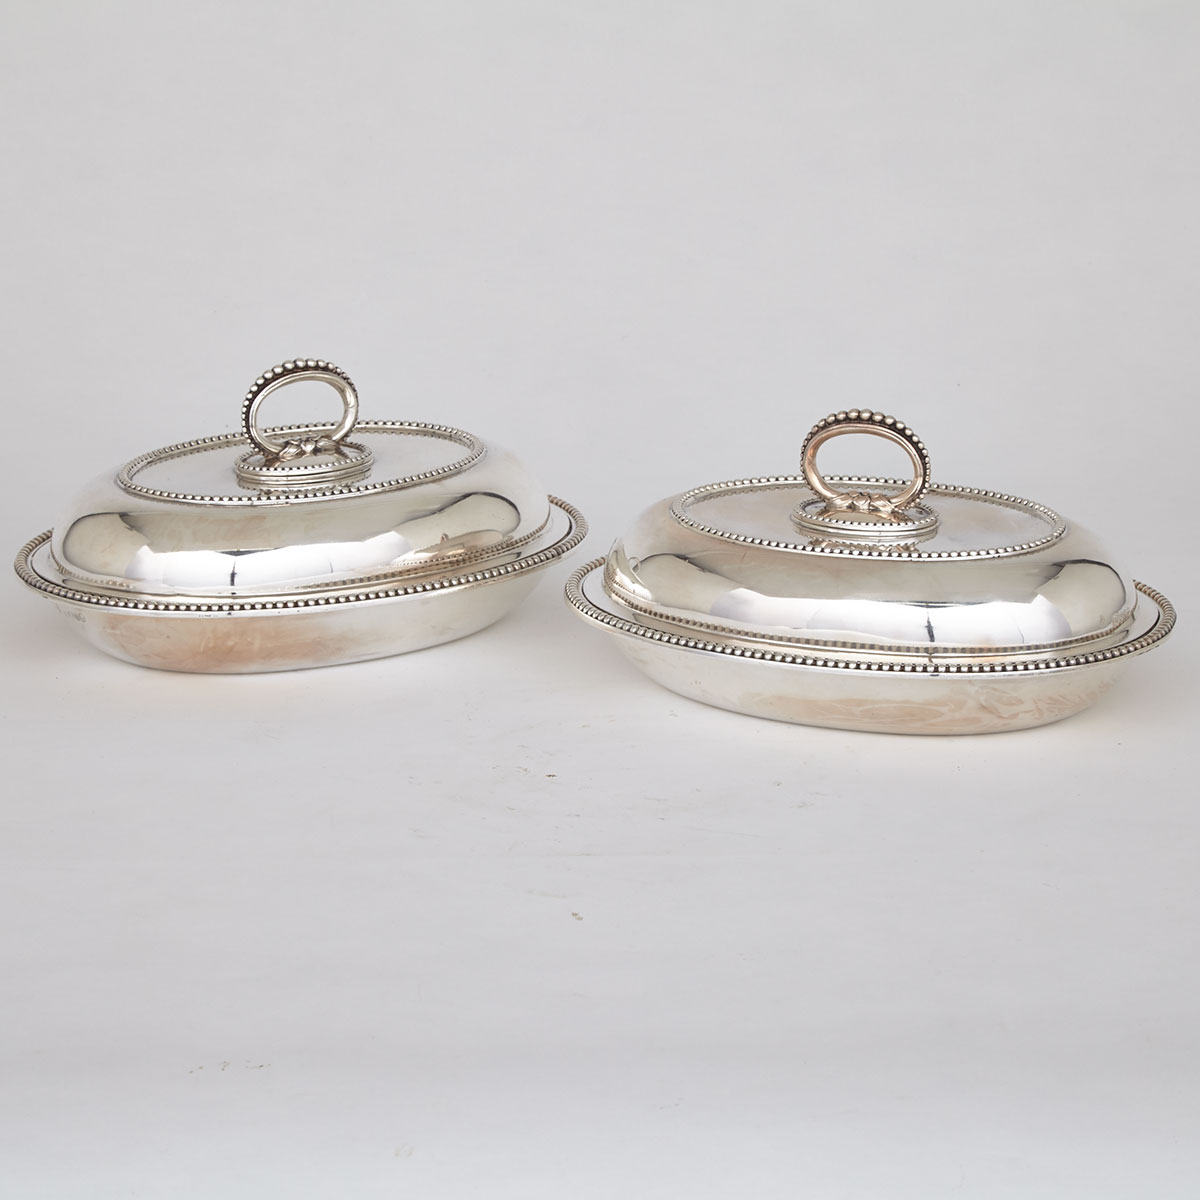 Pair of Victorian Silver Oval Entrée Dishes with Covers, Robert Garrard II, London, 1856